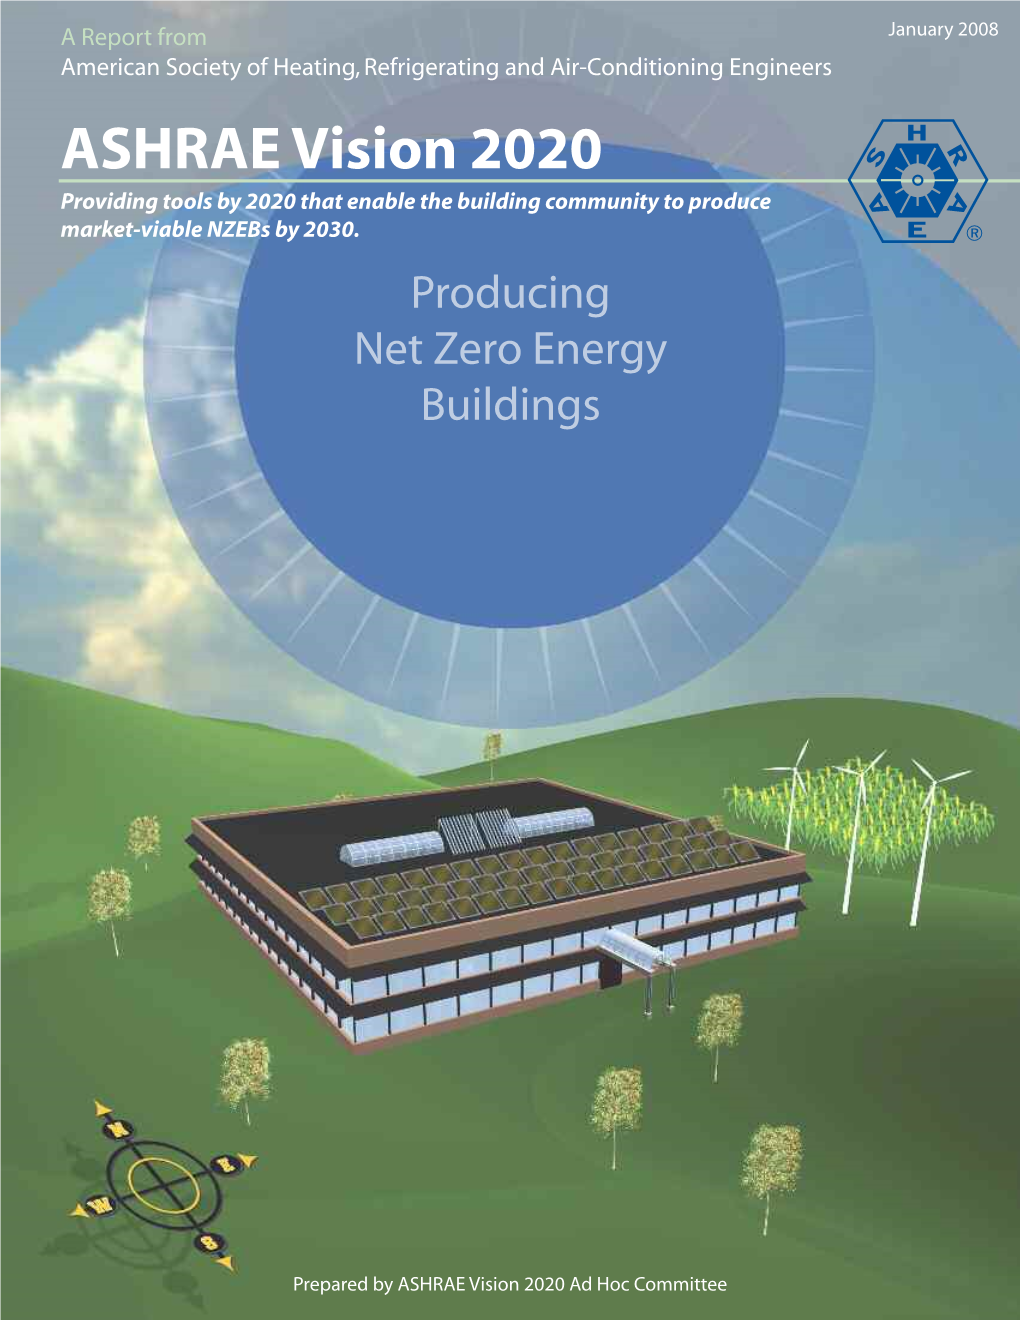 ASHRAE Vision 2020 Providing Tools by 2020 That Enable the Building Community to Produce Market-Viable Nzebs by 2030